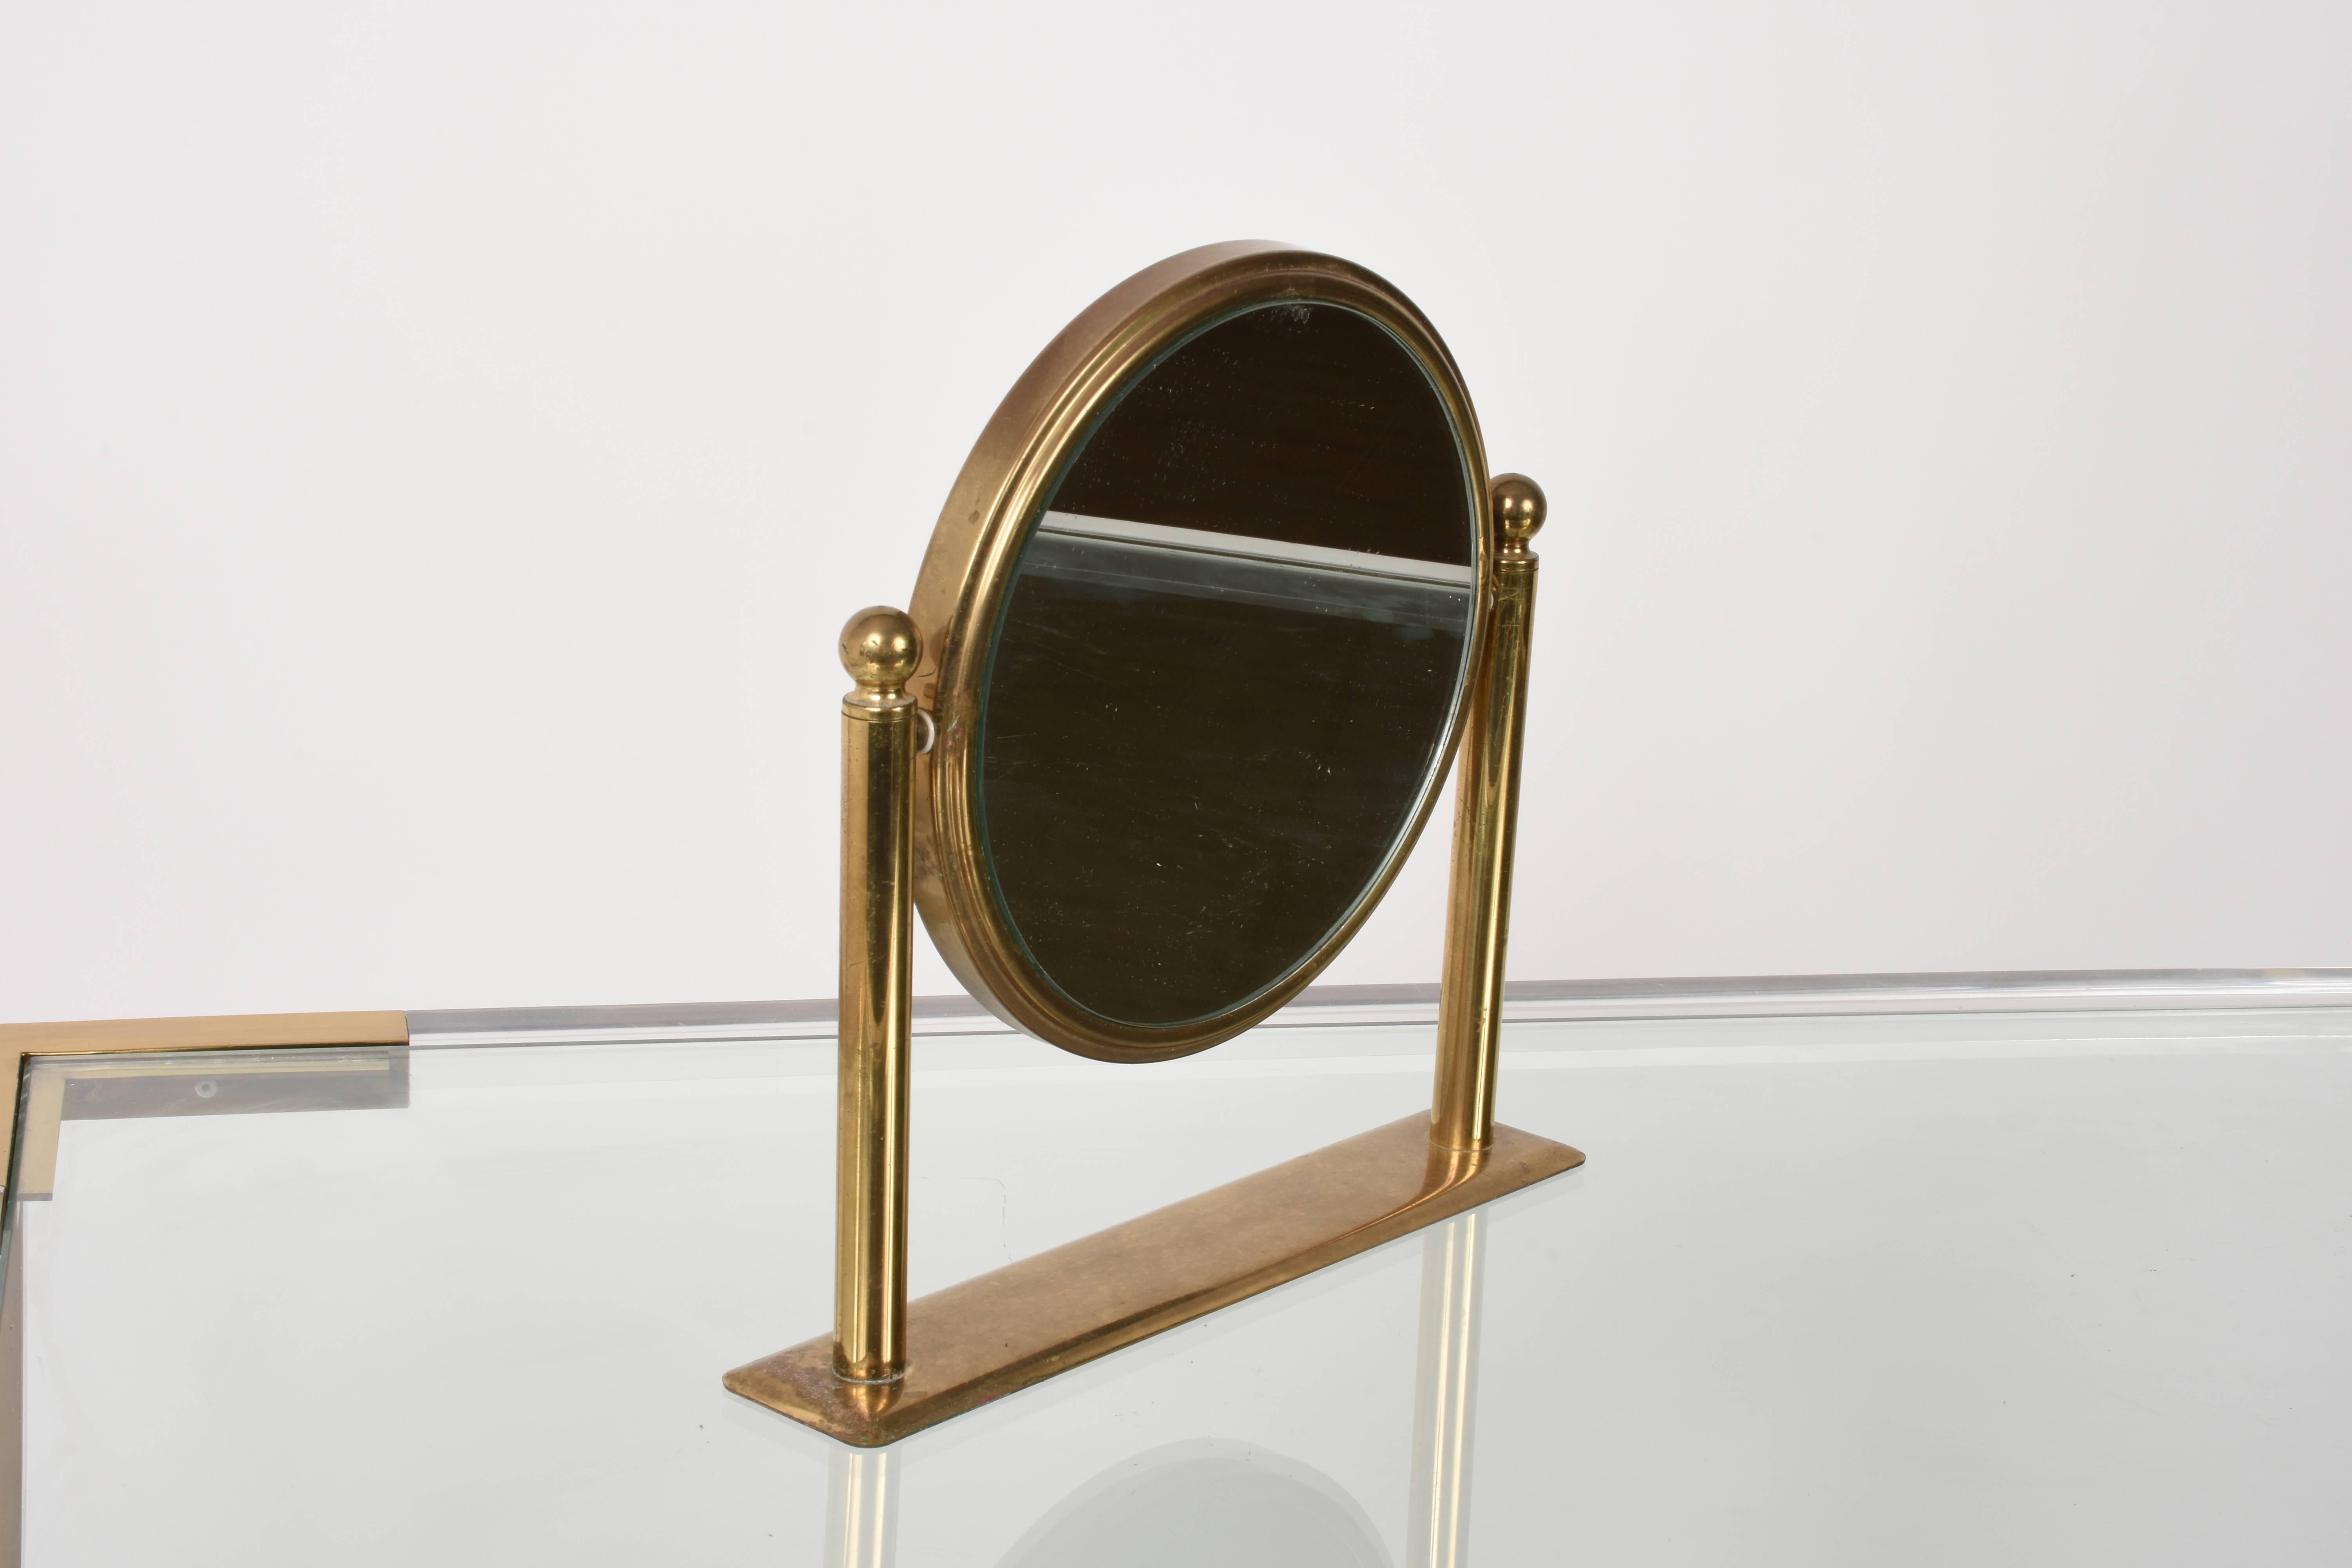 20th Century Table Mirror in Brass, Double-Sided Vanity, Adjustable and Magnified